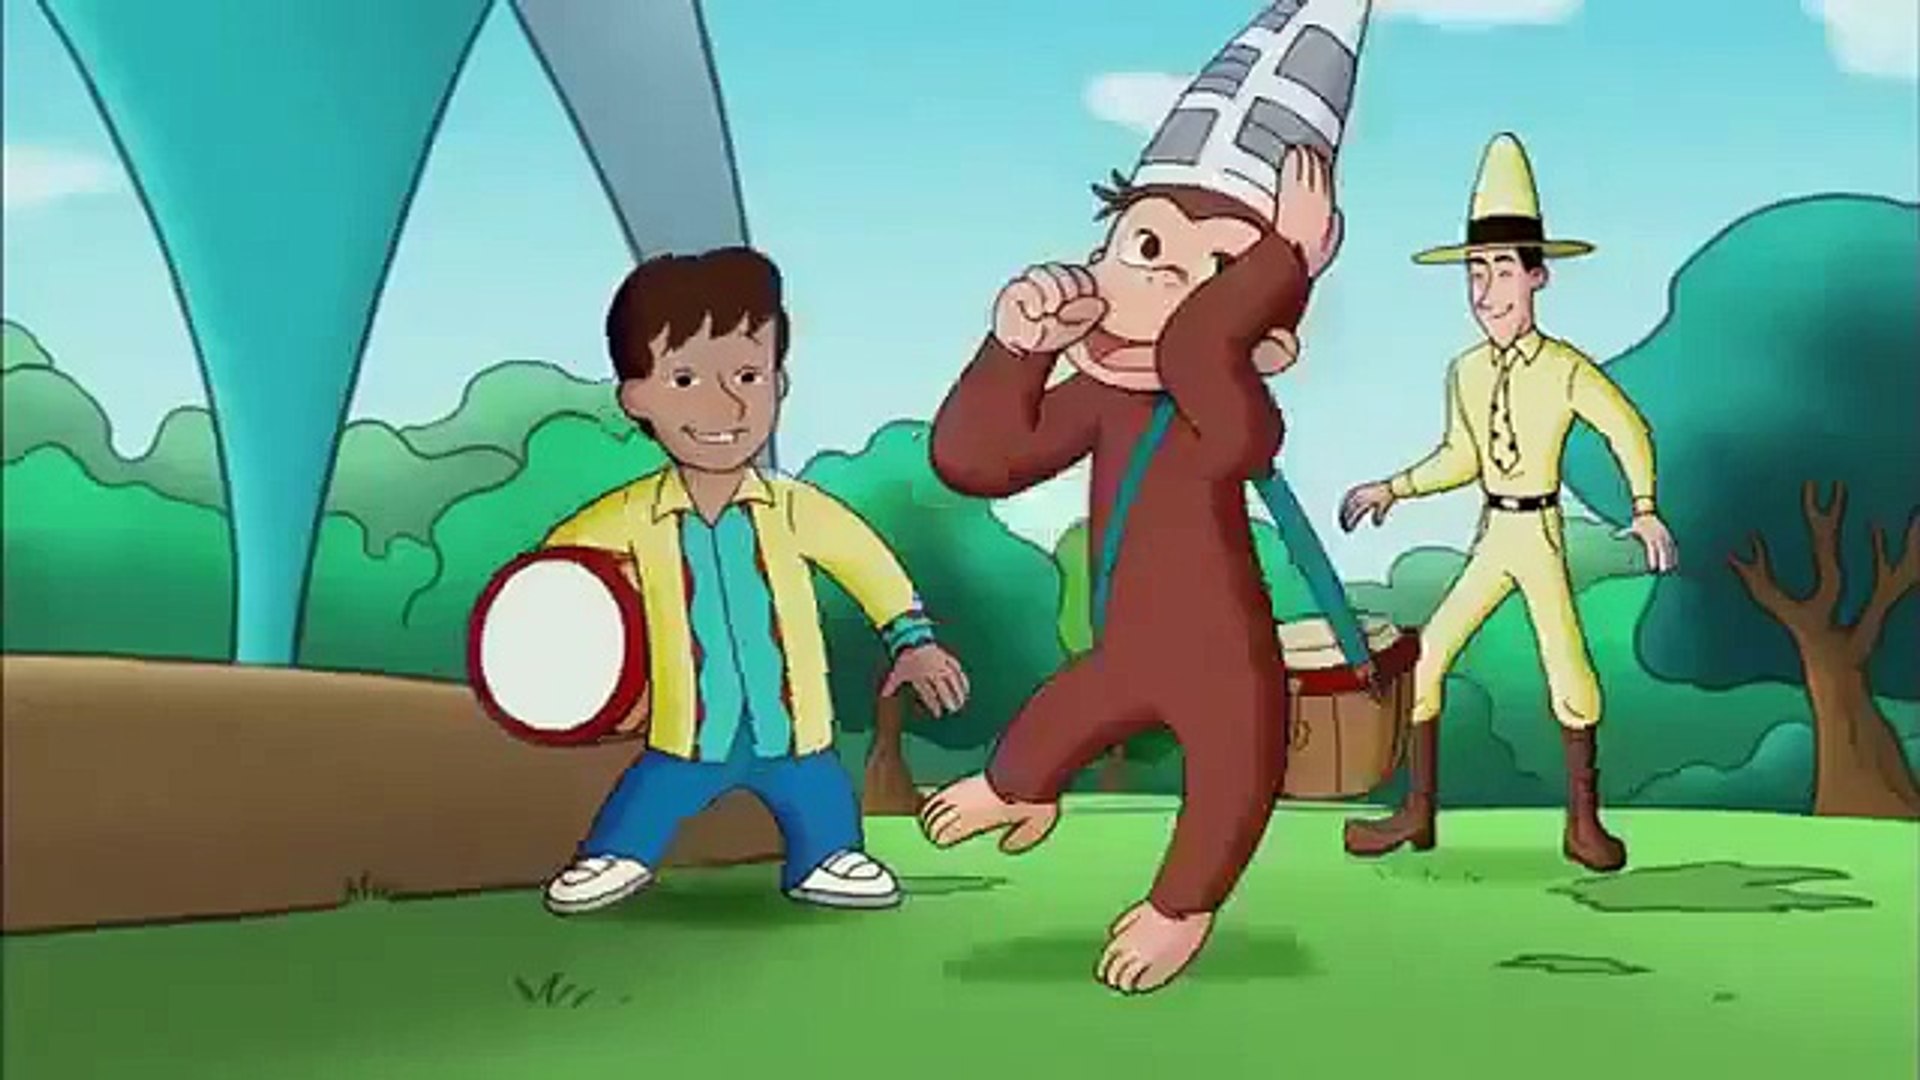 Watch Curious George Season 5, Episode 10: Mother's Day Surprise